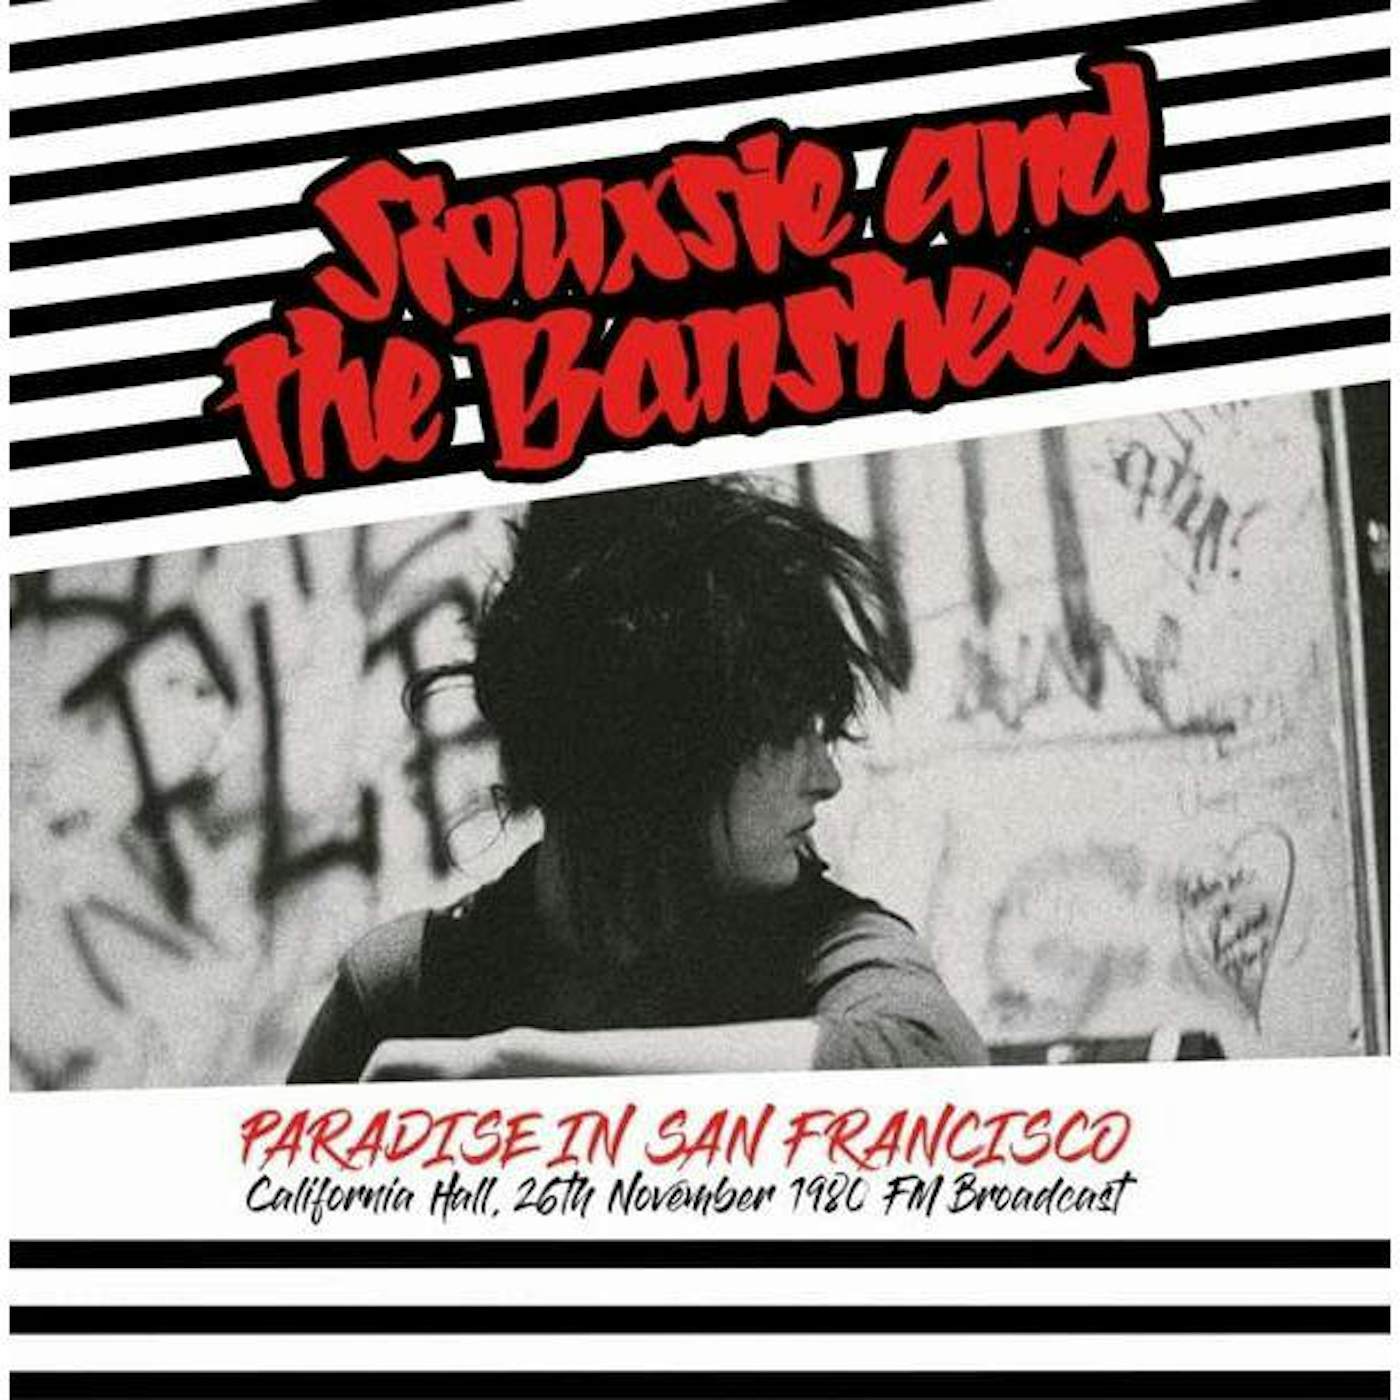 Siouxsie and the Banshees 25057 Paradise In San Francisco: California Hall, 26th November 1980 Fm Broadcast Vinyl Record